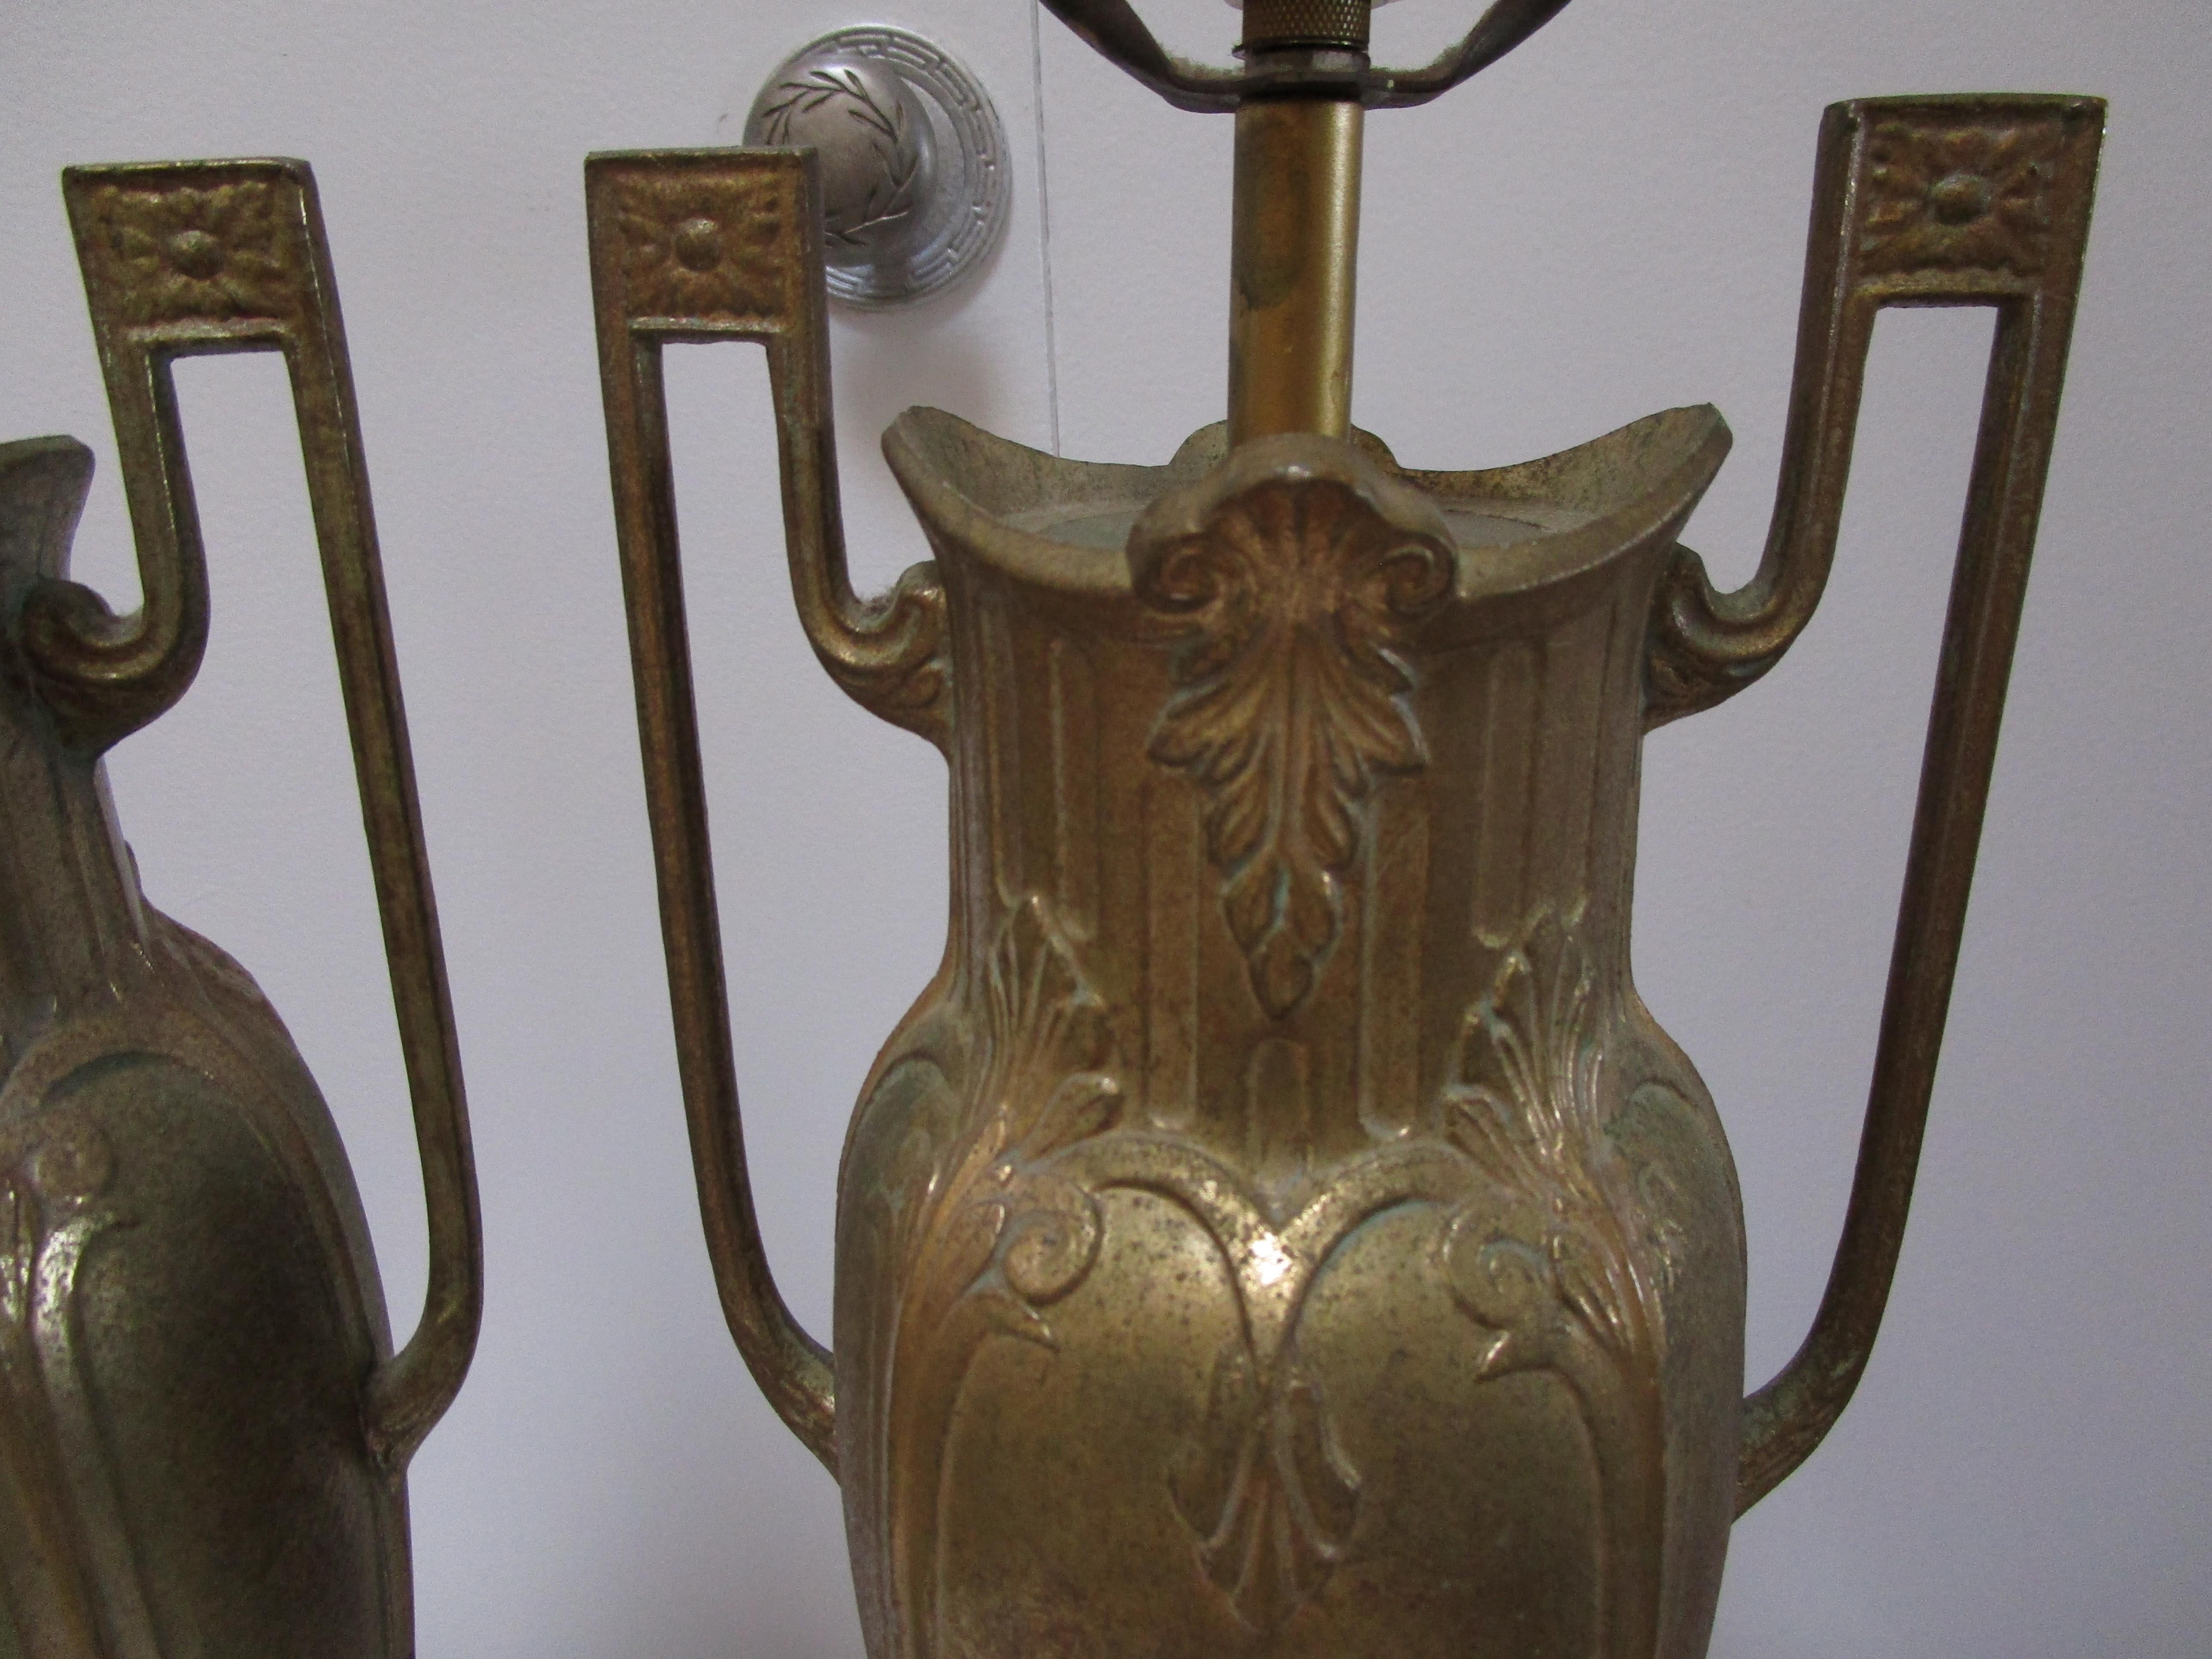 Gilt Brass Vintage Neo Classical Revival Table Lamps In Good Condition For Sale In Lomita, CA